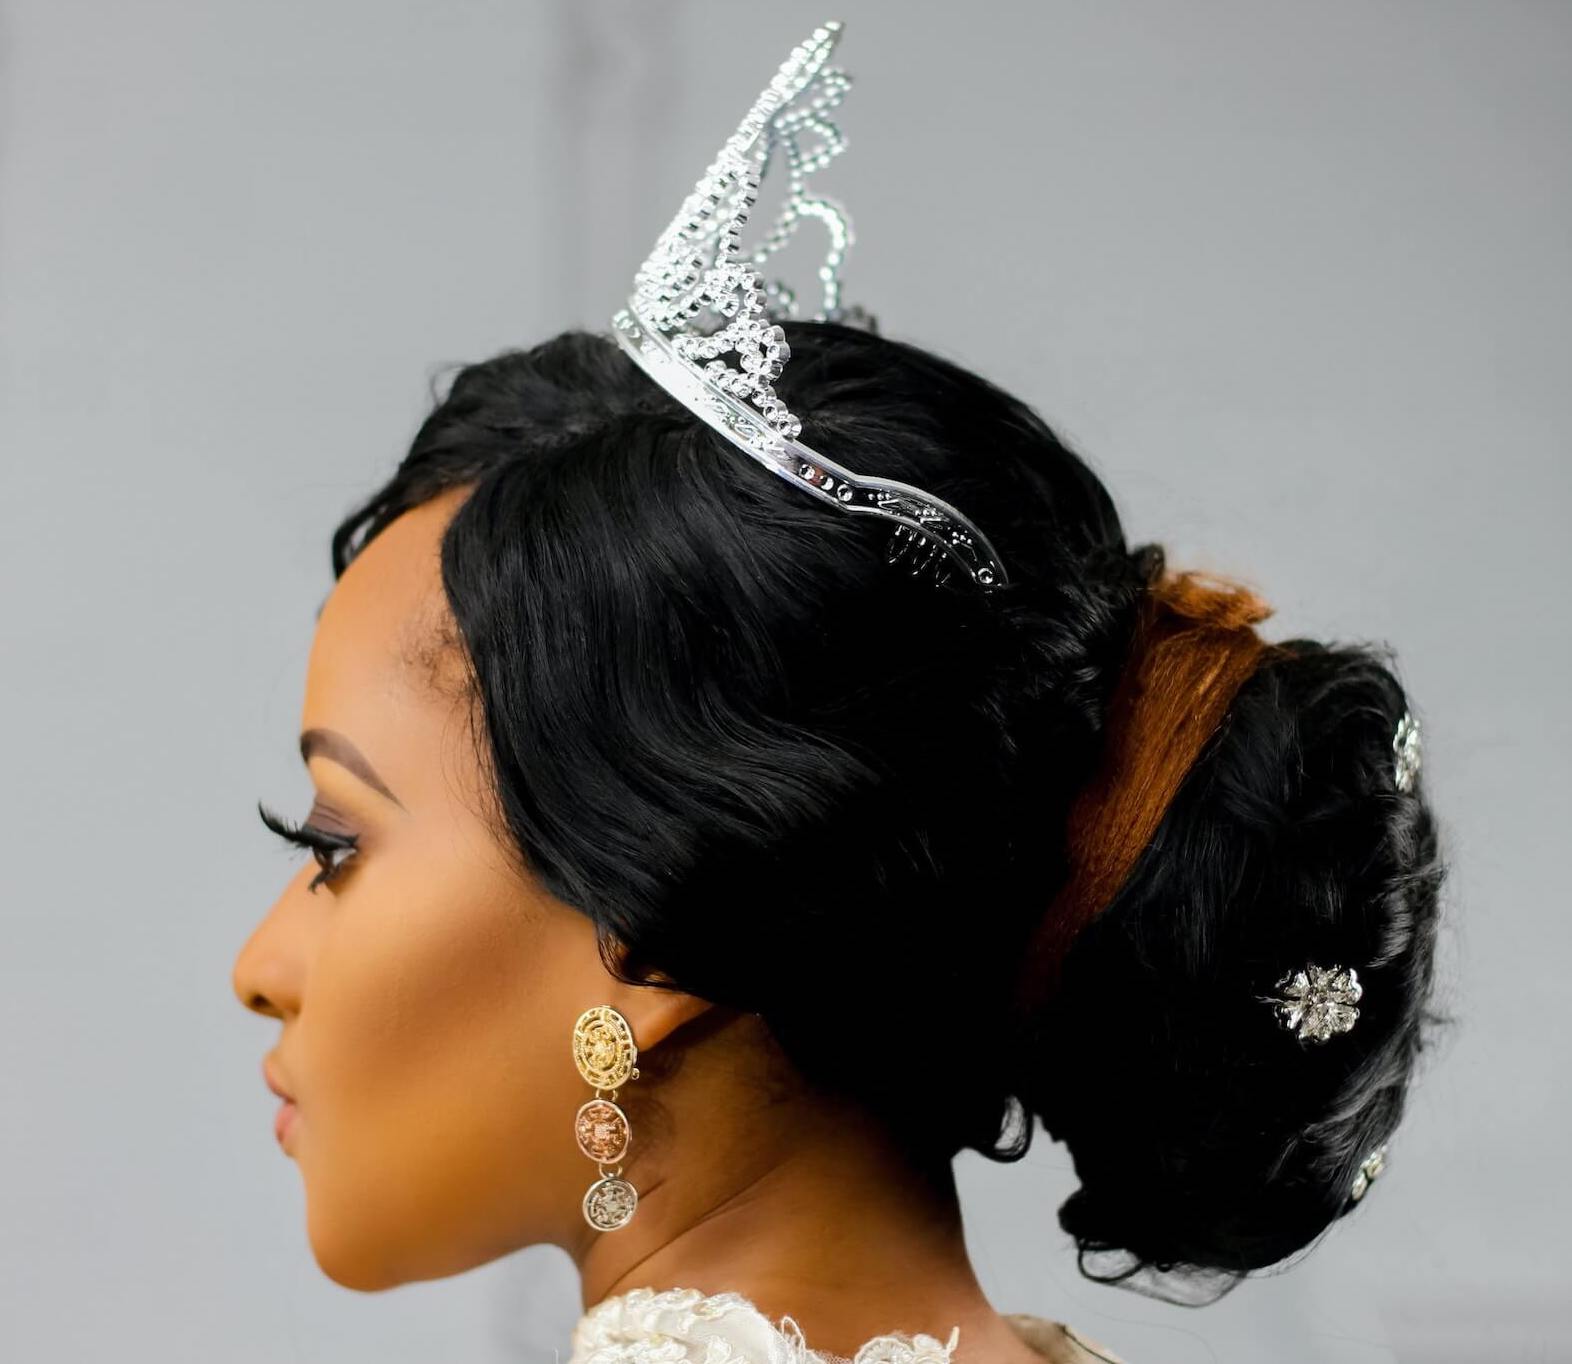 Tiaras aren’t just for beauty queens, ladies - a crown can make you fierce